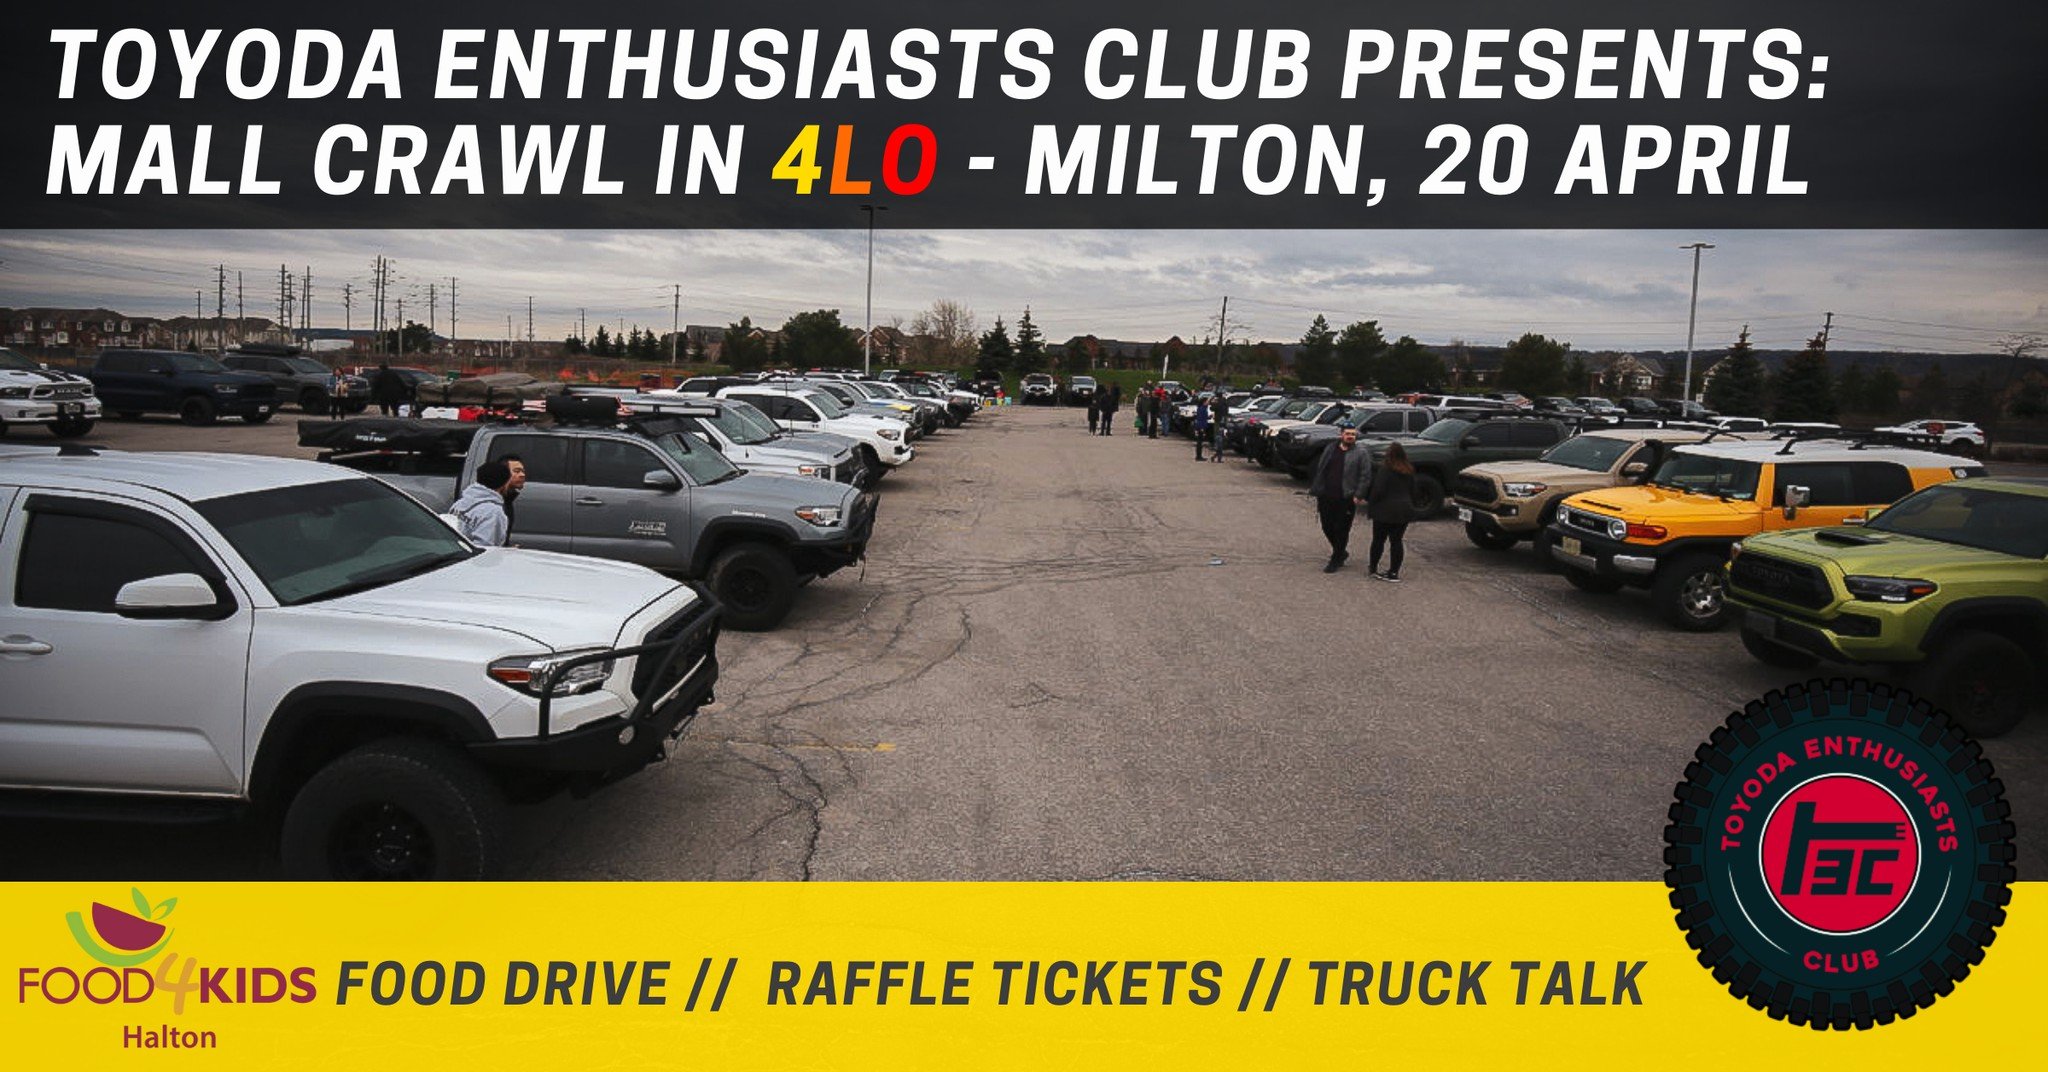 🛻 Come out to the SOTEC Mall Crawl in 4LO Meetup! 🛻

Meet other Toyota Enthusiasts, check out their builds and show off your truck! 

Where: 6941 Derry Rd, Milton, ON L9T 7H5
https://goo.gl/maps/KkJWQzwnMzHfJ7jd8

When: Saturday, April 20, 2024 @NO